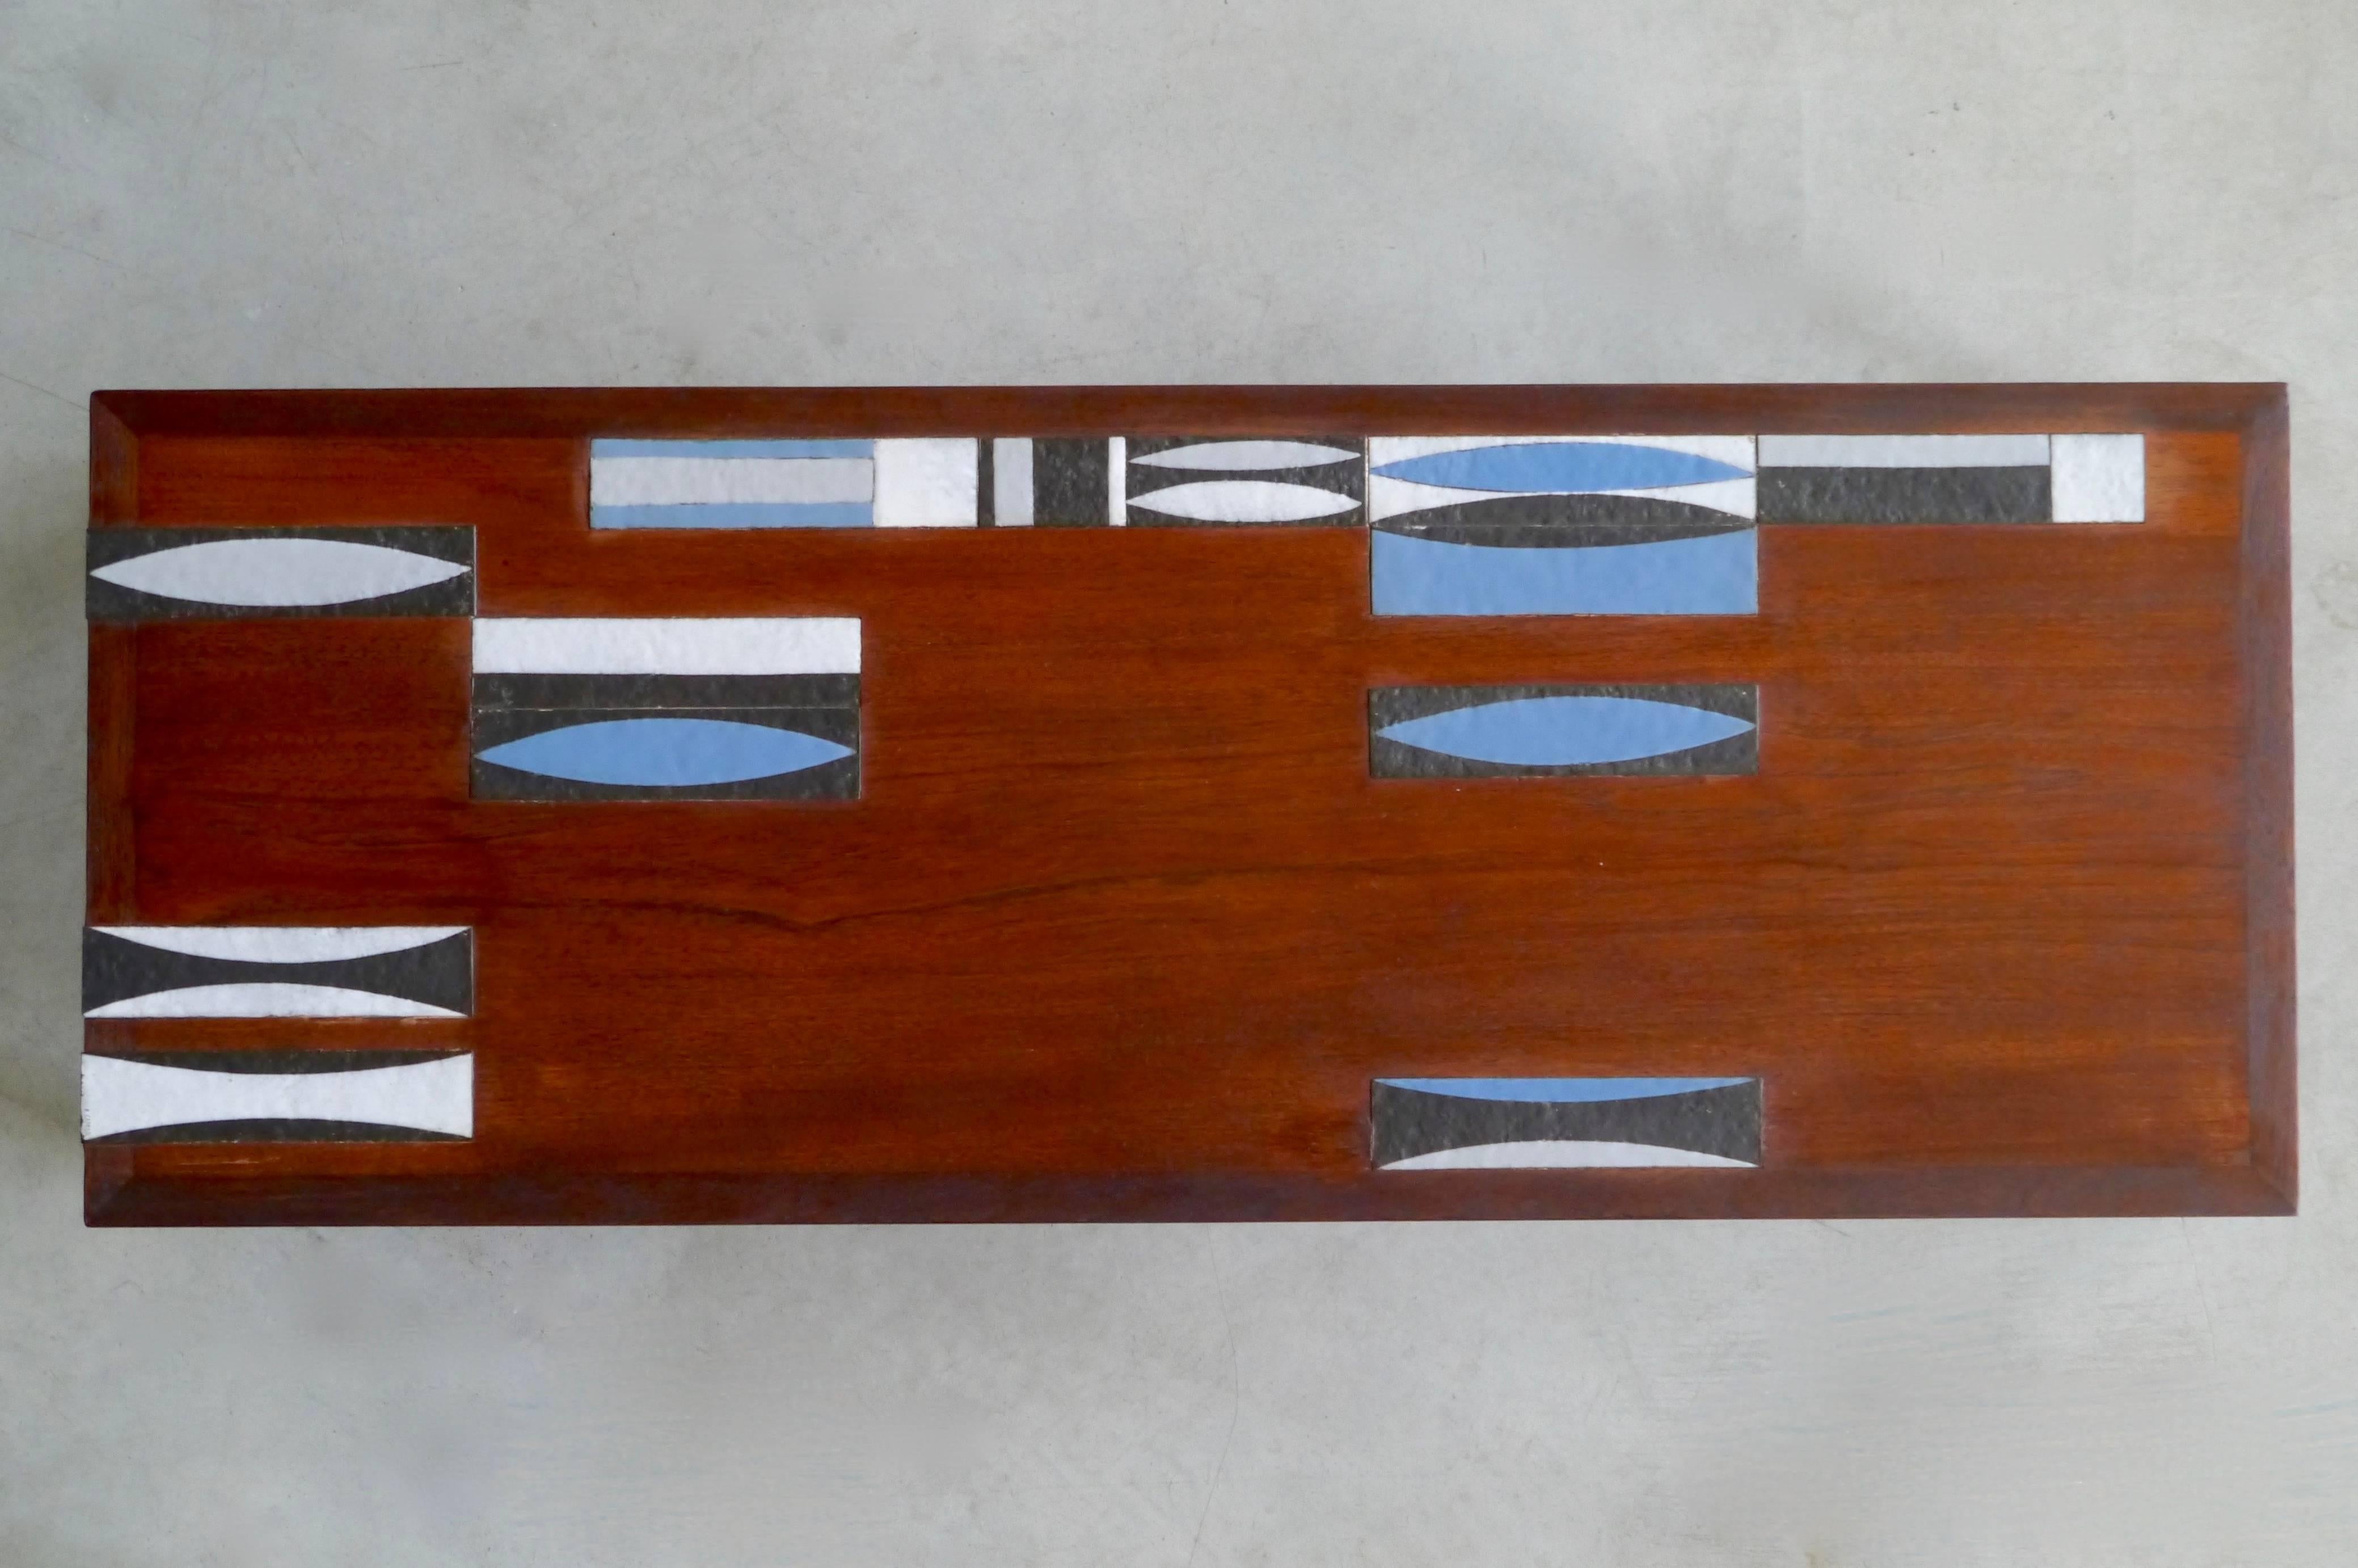 Scandinavian Modern Roger Capron - Exceptional Coffee Table - Vallauris France - c. 1960 For Sale